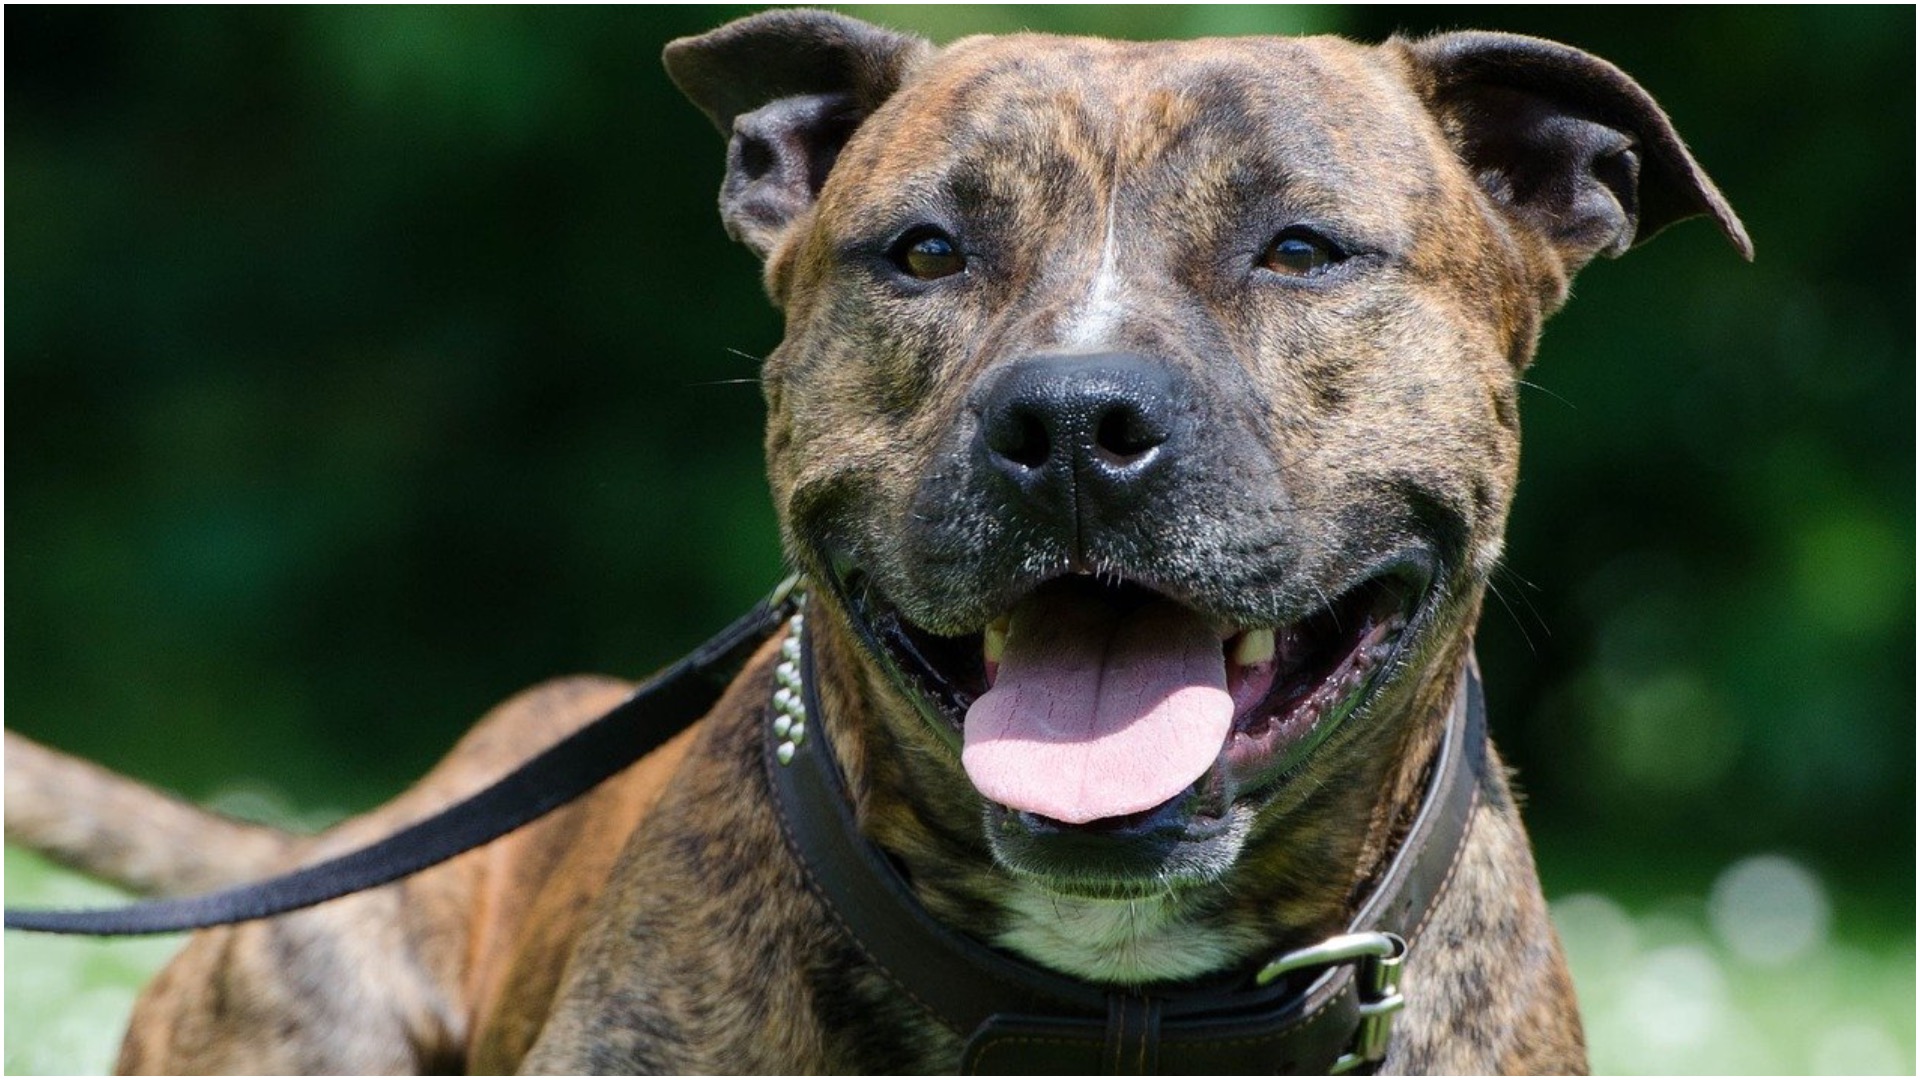 The Brindle Pitbull is one of the rarest color combinations of the Pitbull dog